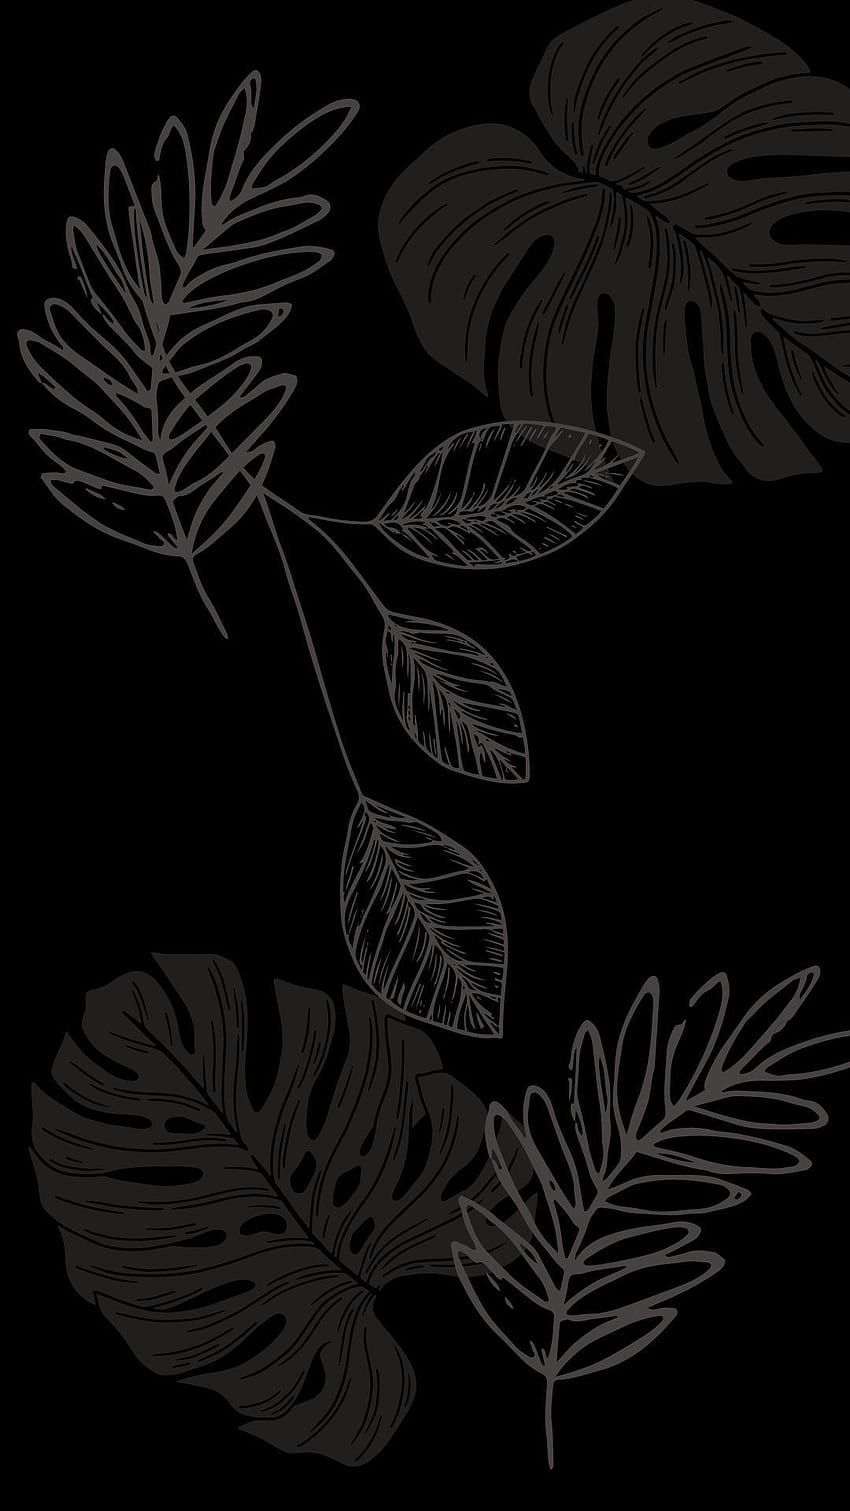 Black and White Palm Leaves Wallpaper, wall mural - ColorayDecor.com